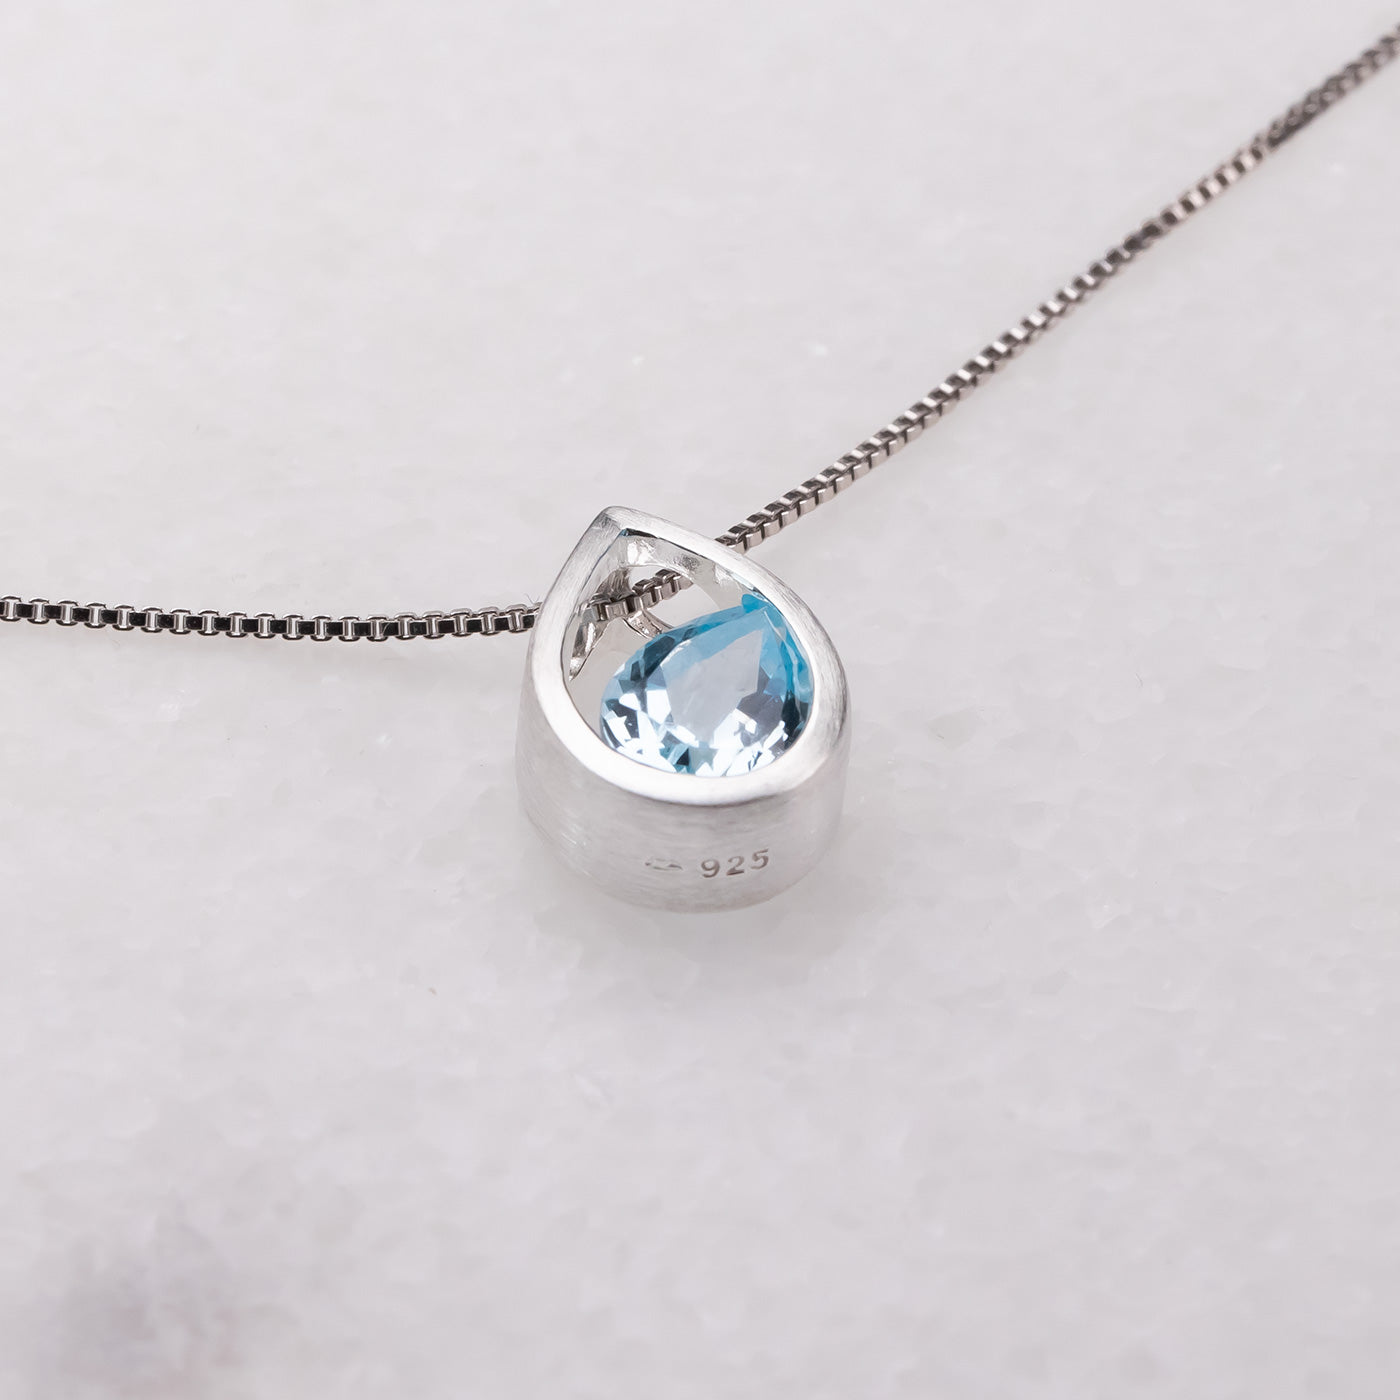 Silver Droplet Pendant With Blue Topaz